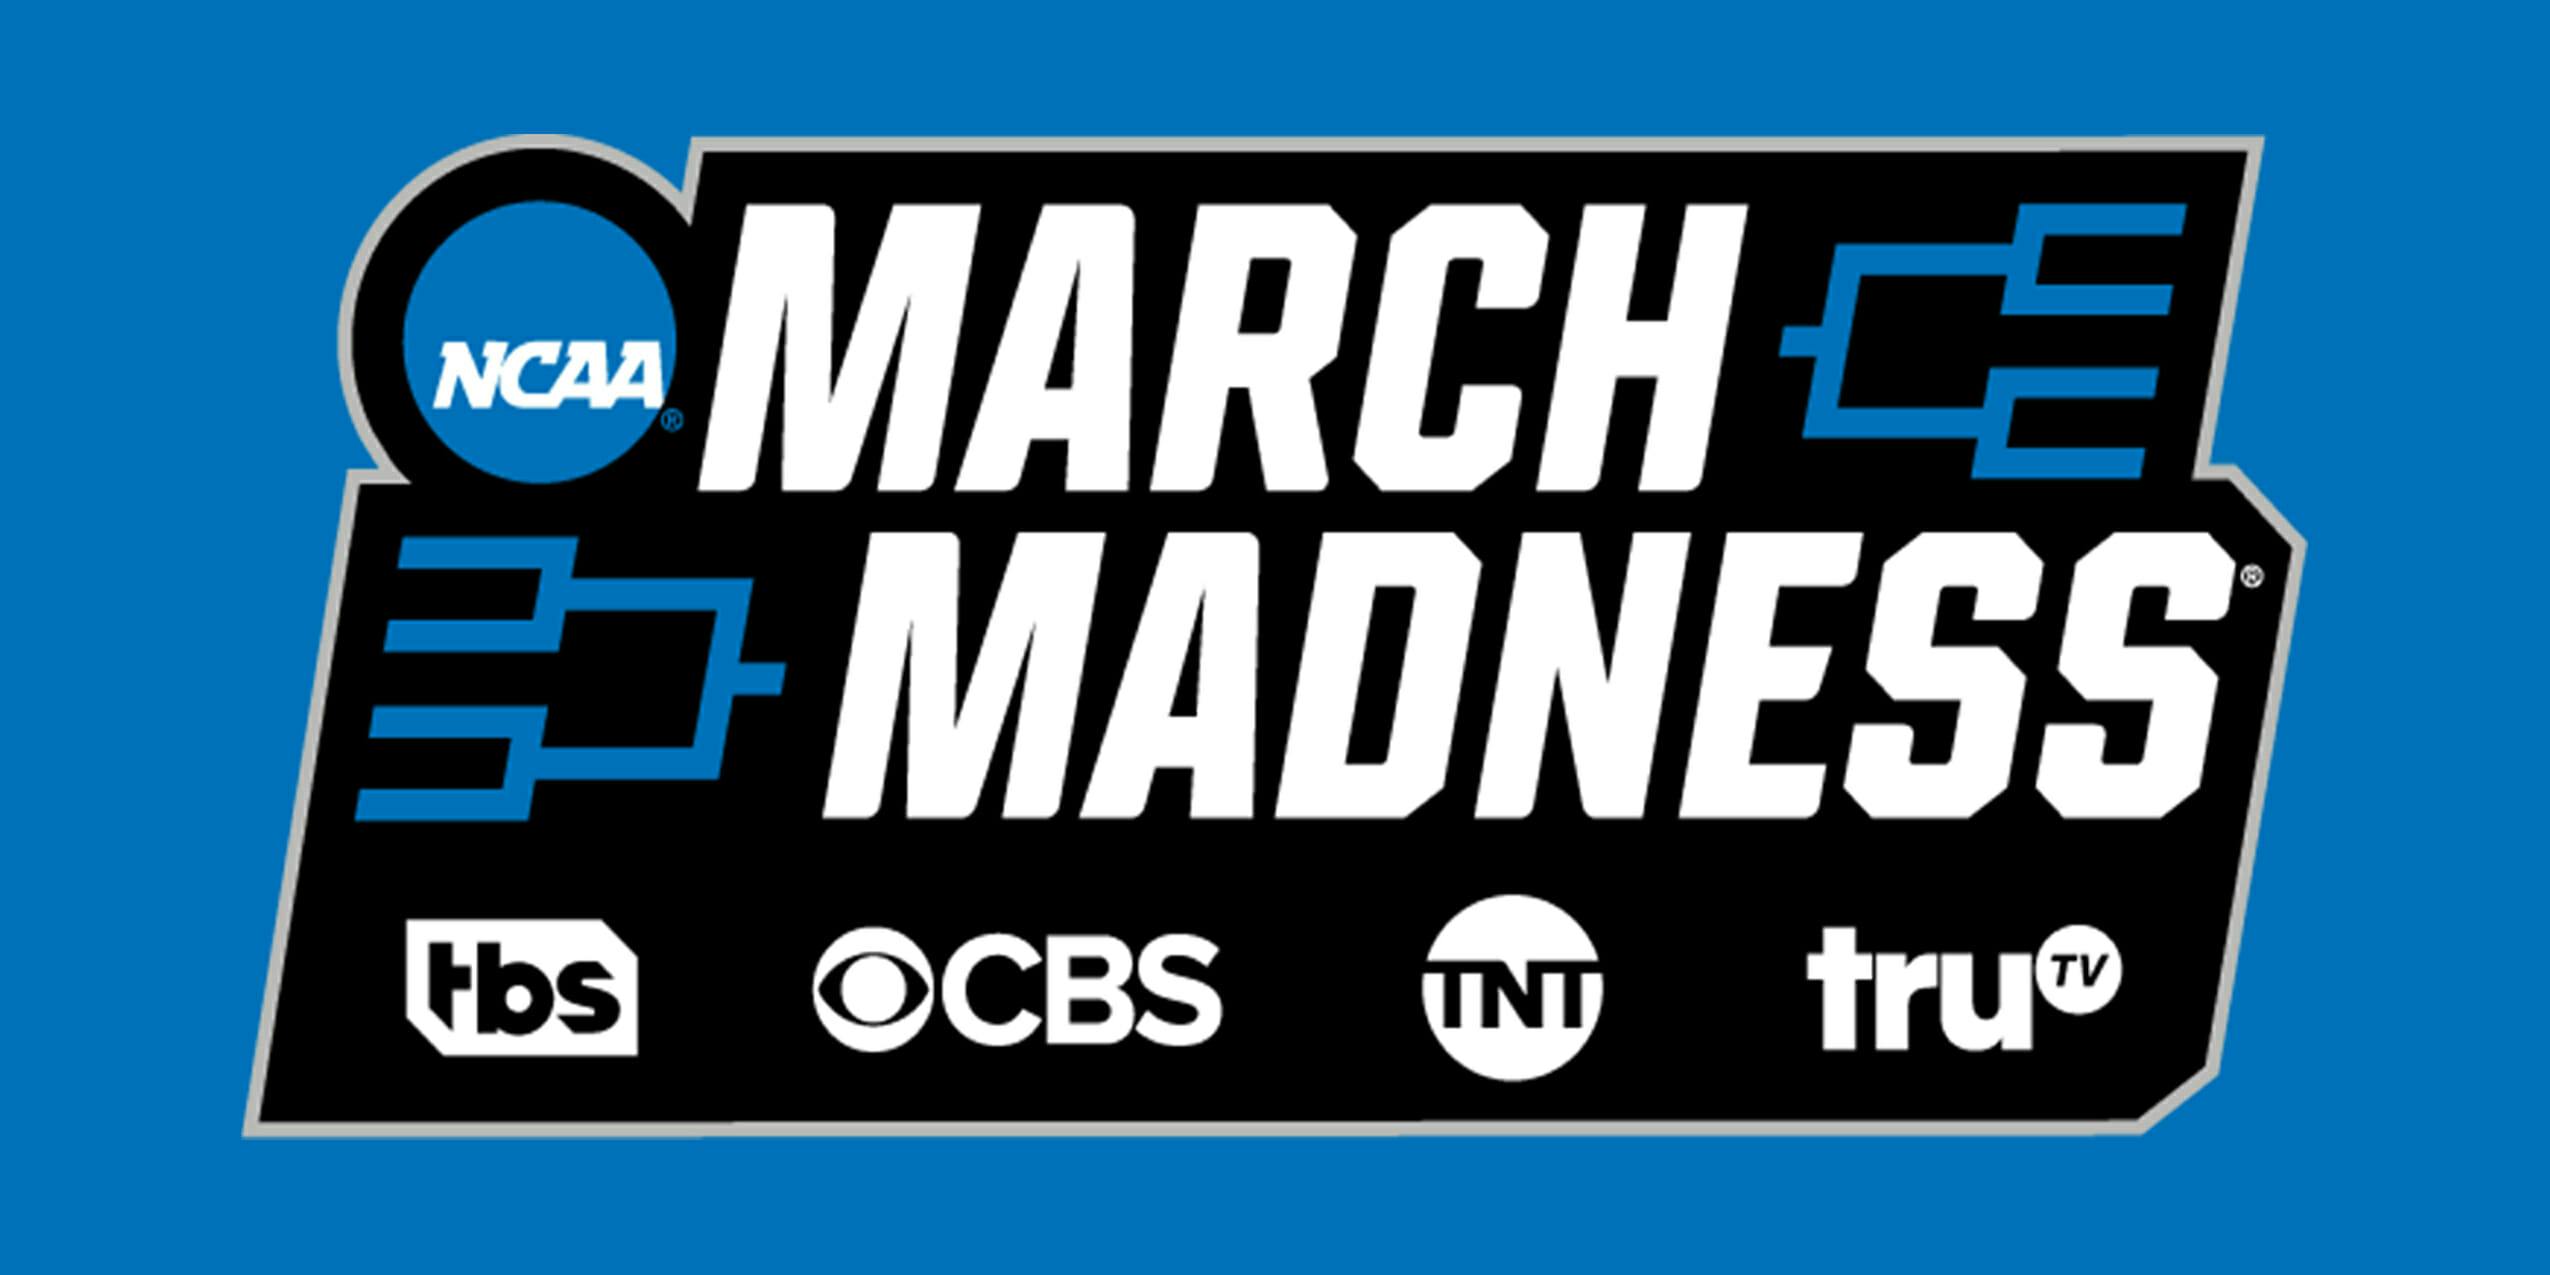 watch march madness 2019 online free on march madness live